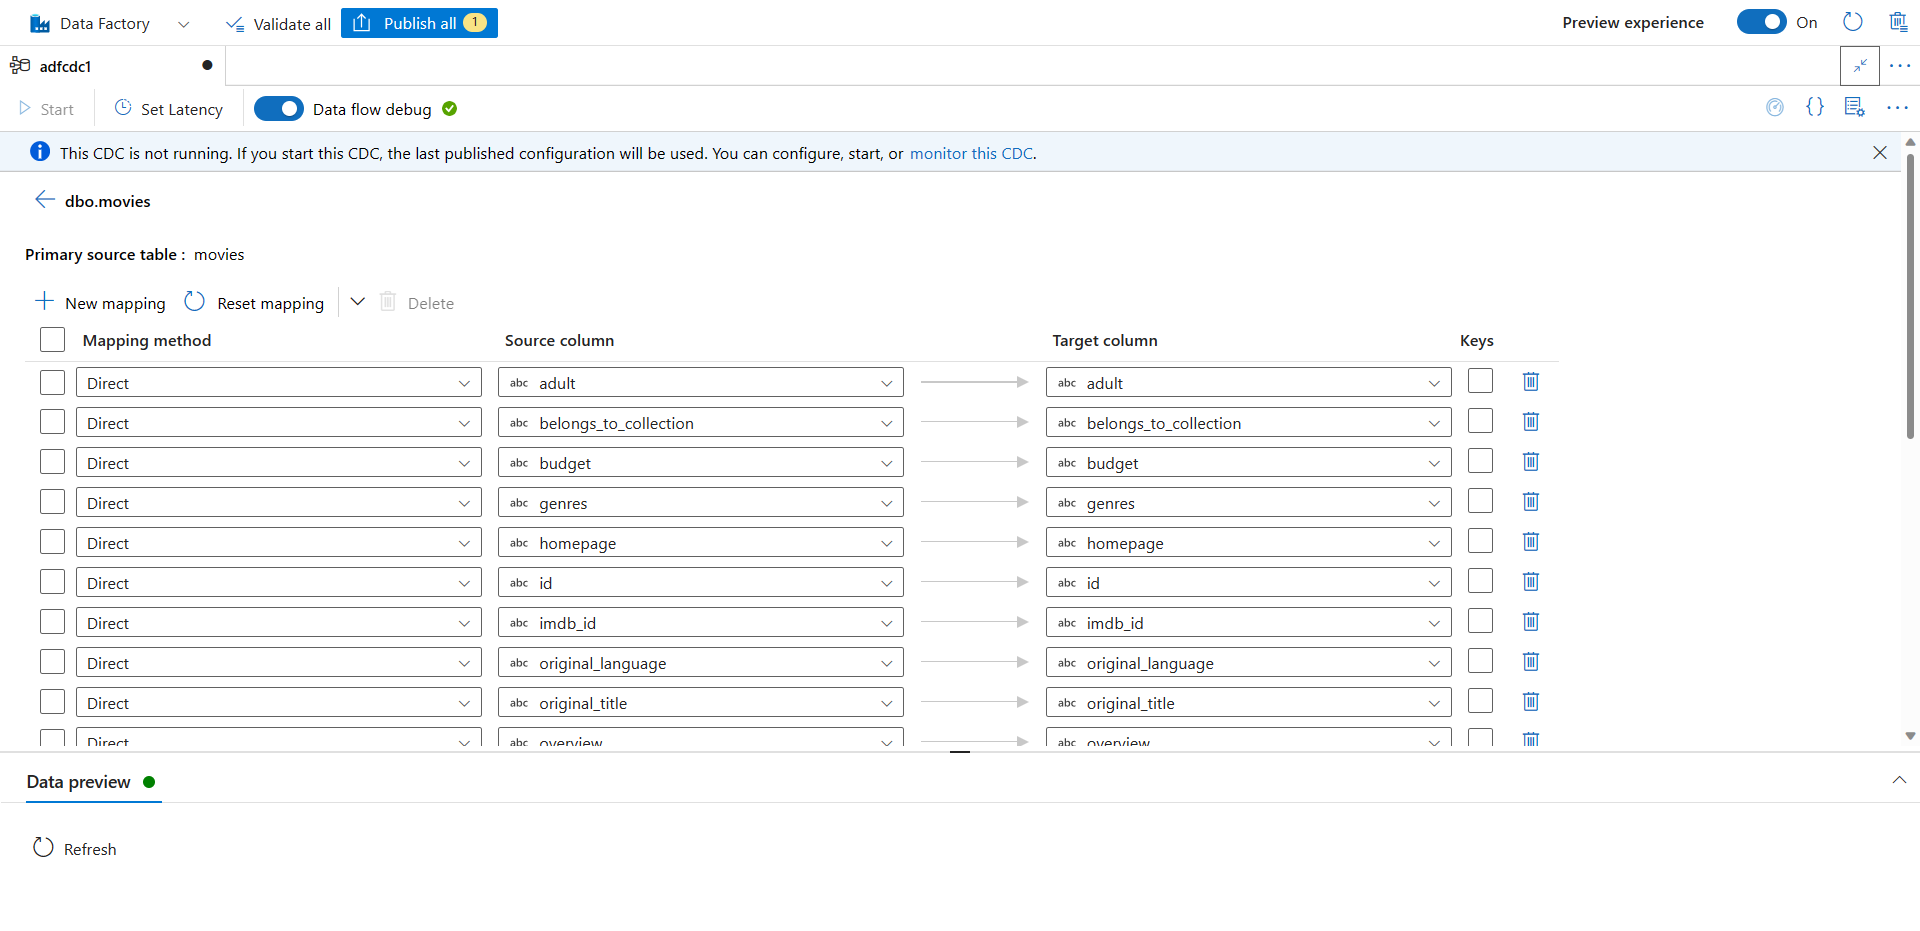 Screenshot of the page for editing column mappings.